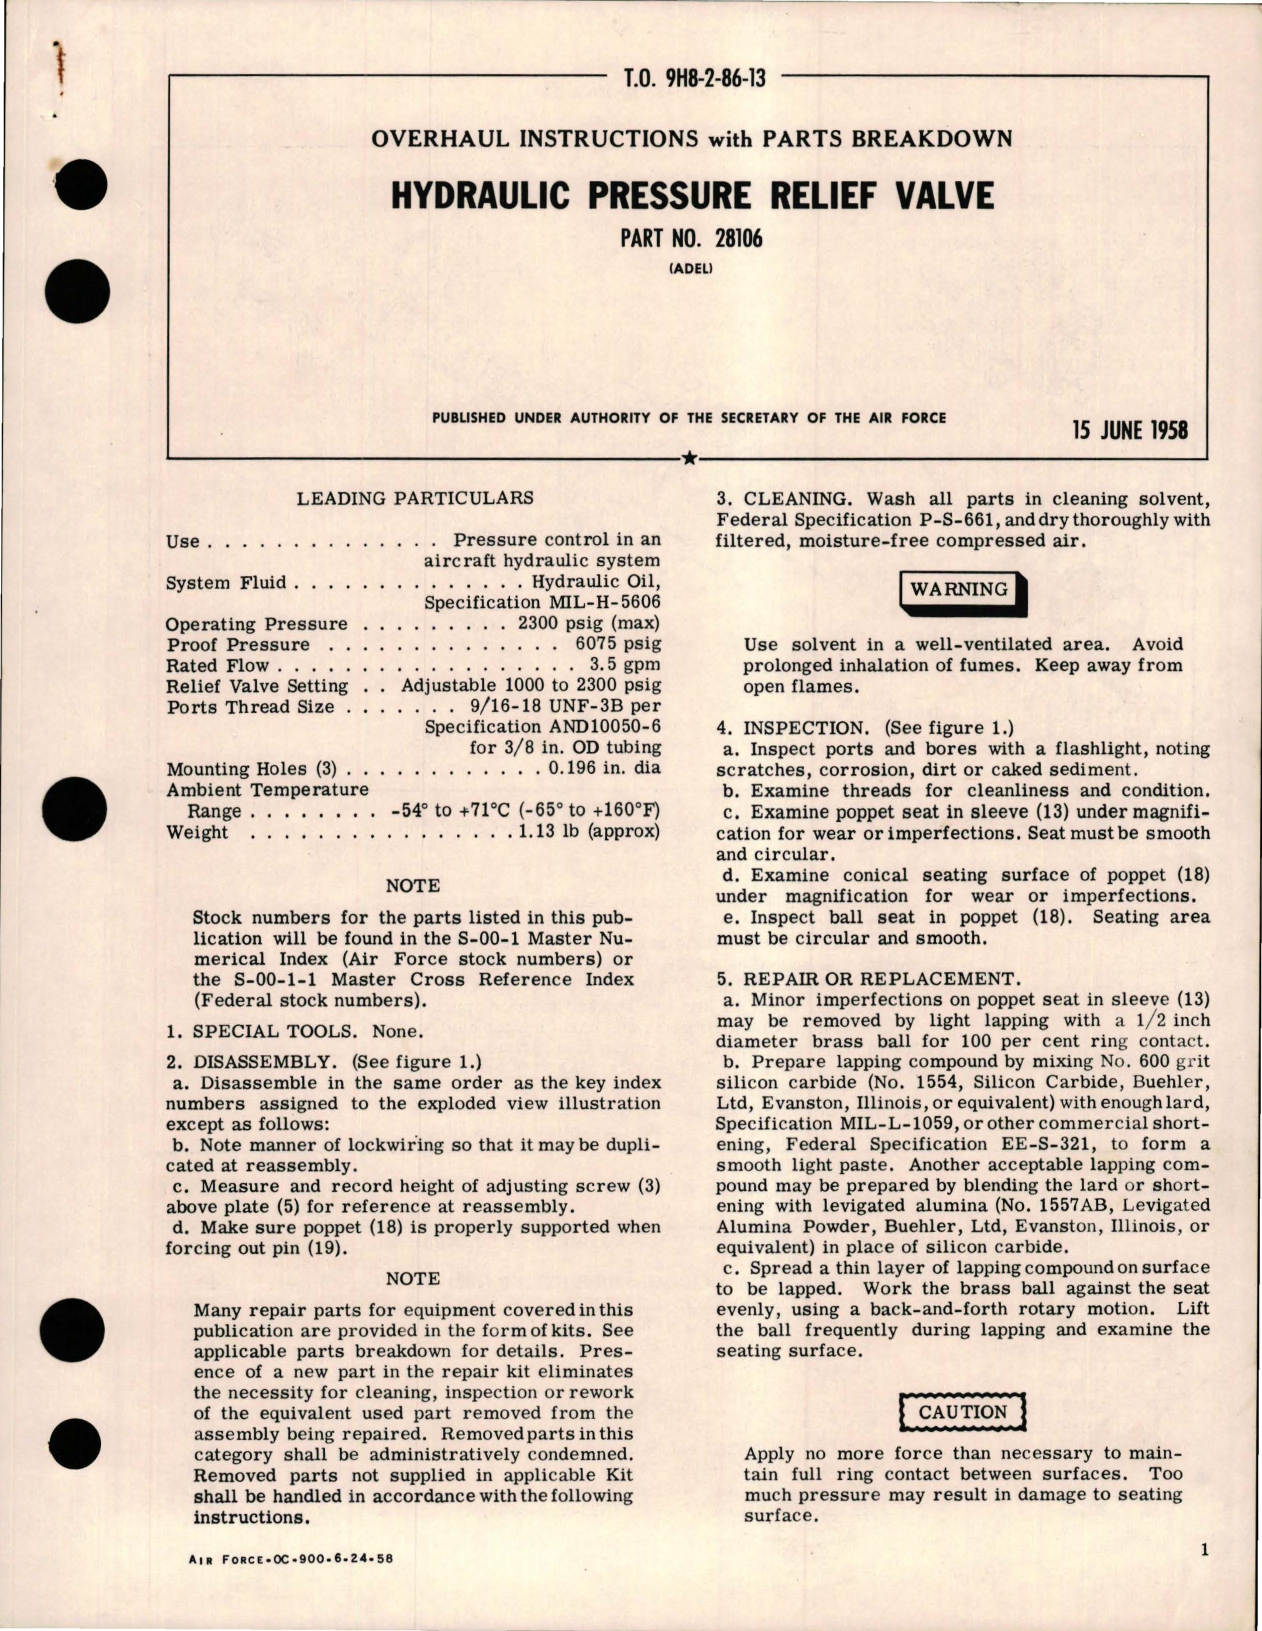 Sample page 1 from AirCorps Library document: Overhaul Instructions w Parts Breakdown for Hydraulic Pressure Relief Valve - Part 28106